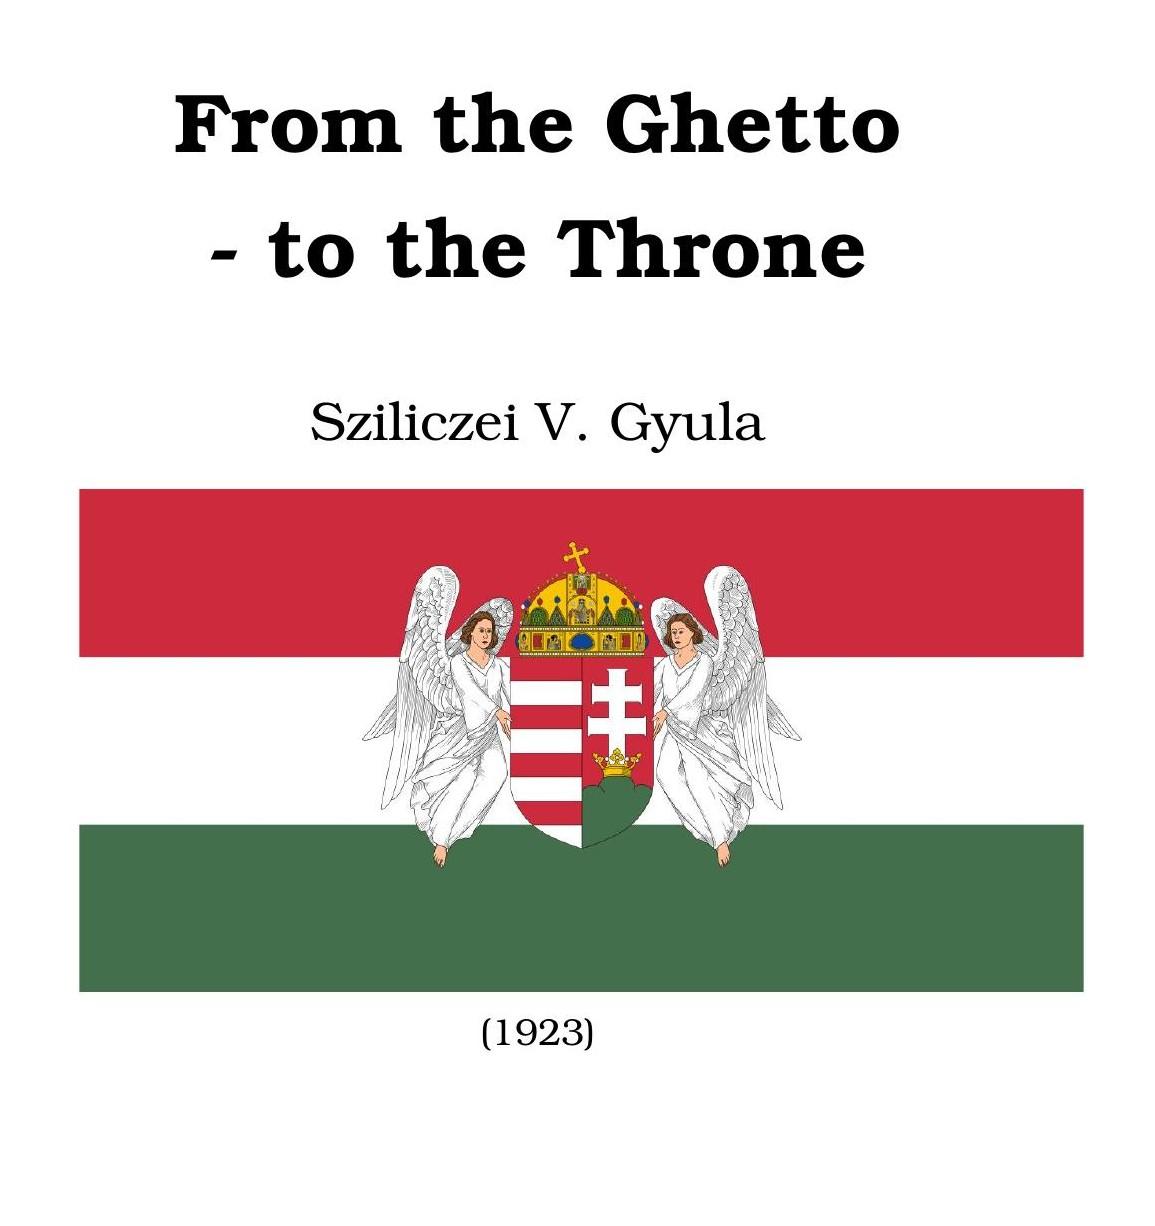 From the Ghetto to the Throne (1878) by Sziliczei V. Gyula